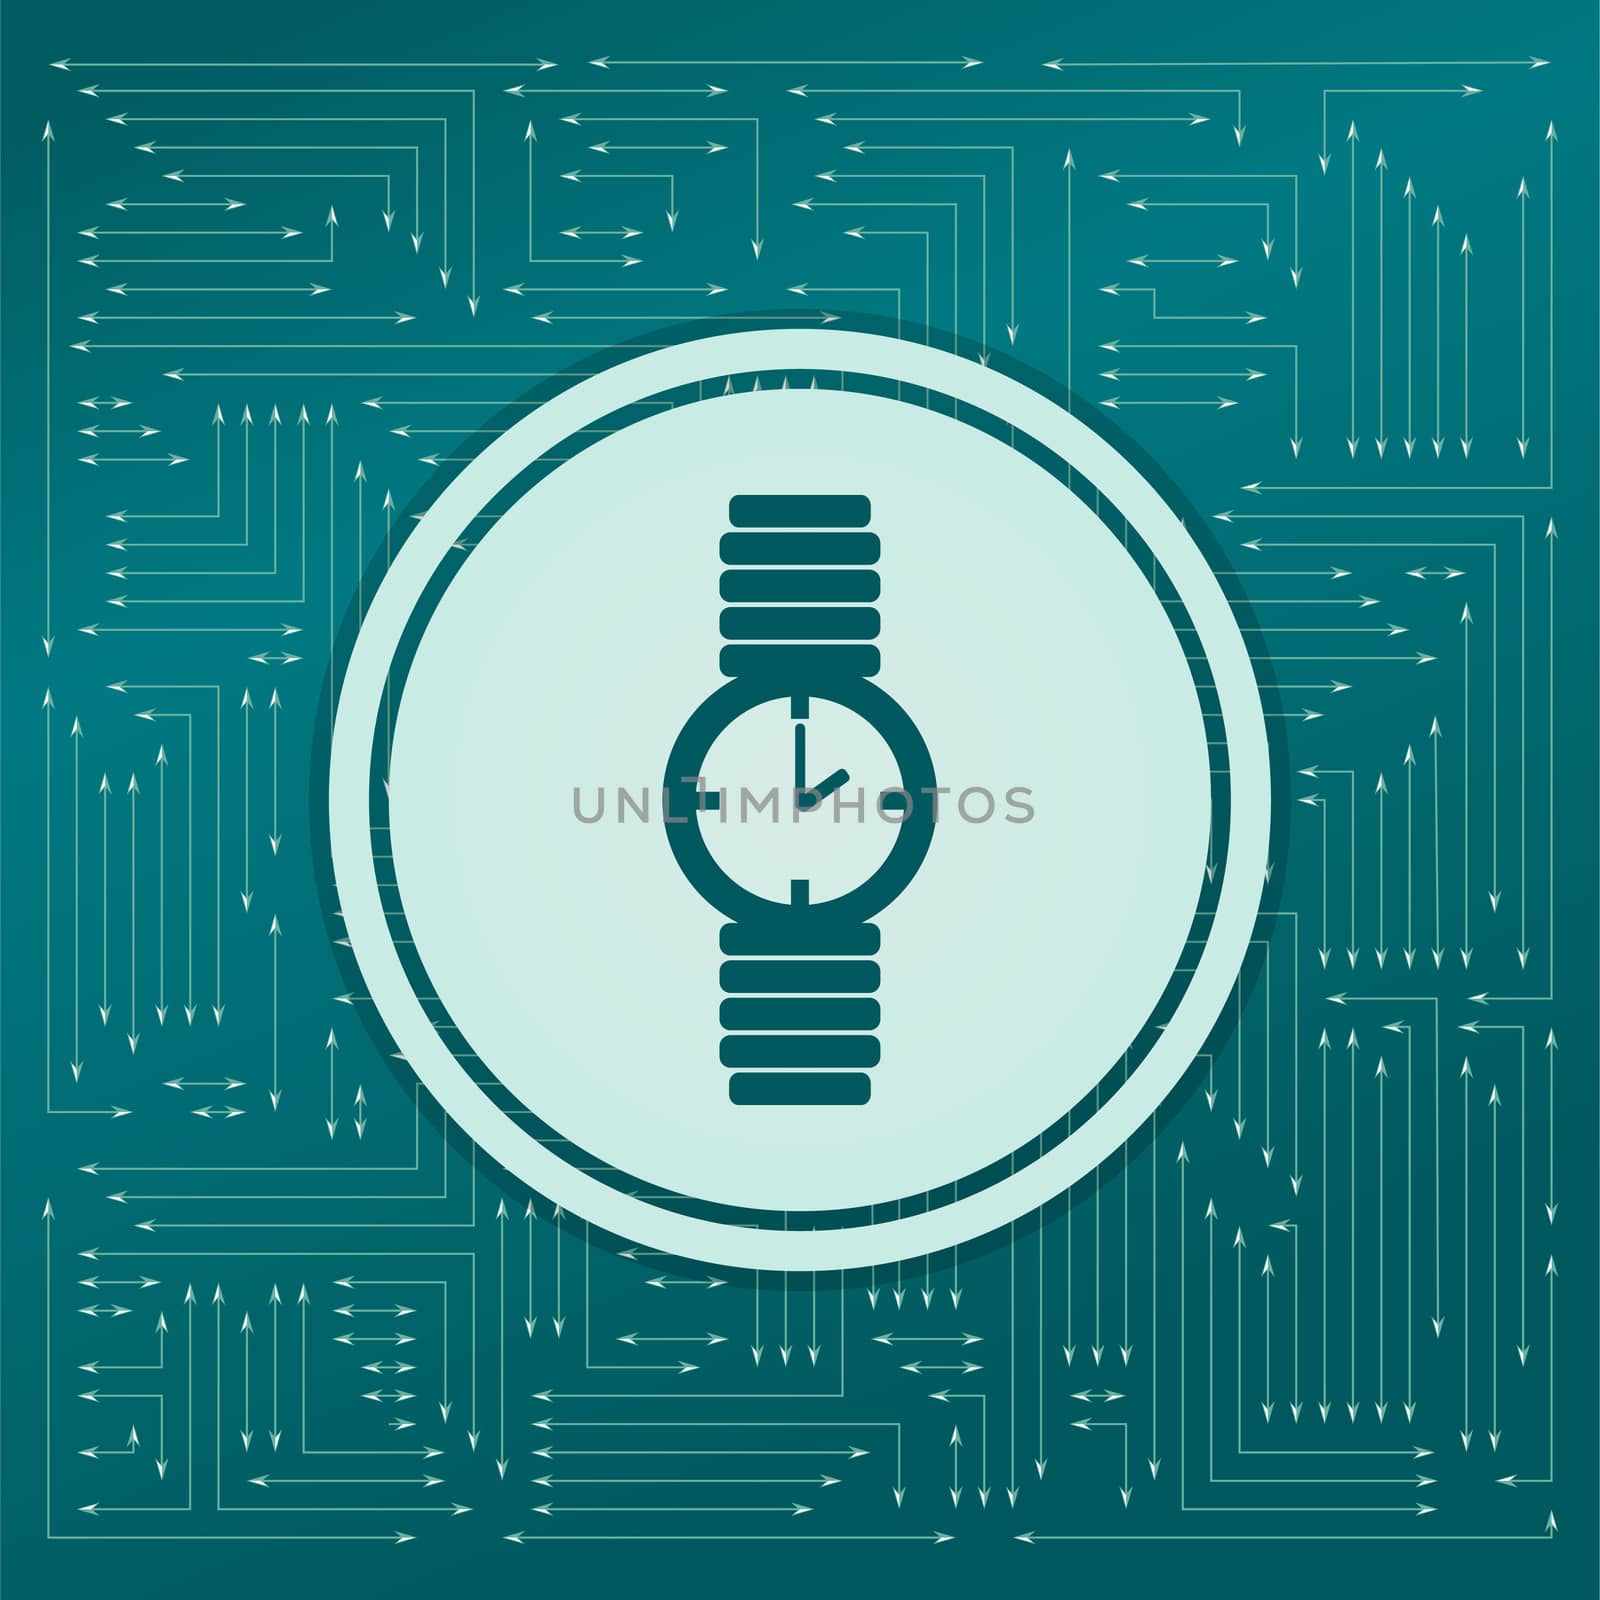 watch icon on a green background, with arrows in different directions. It appears the electronic board.  by Adamchuk